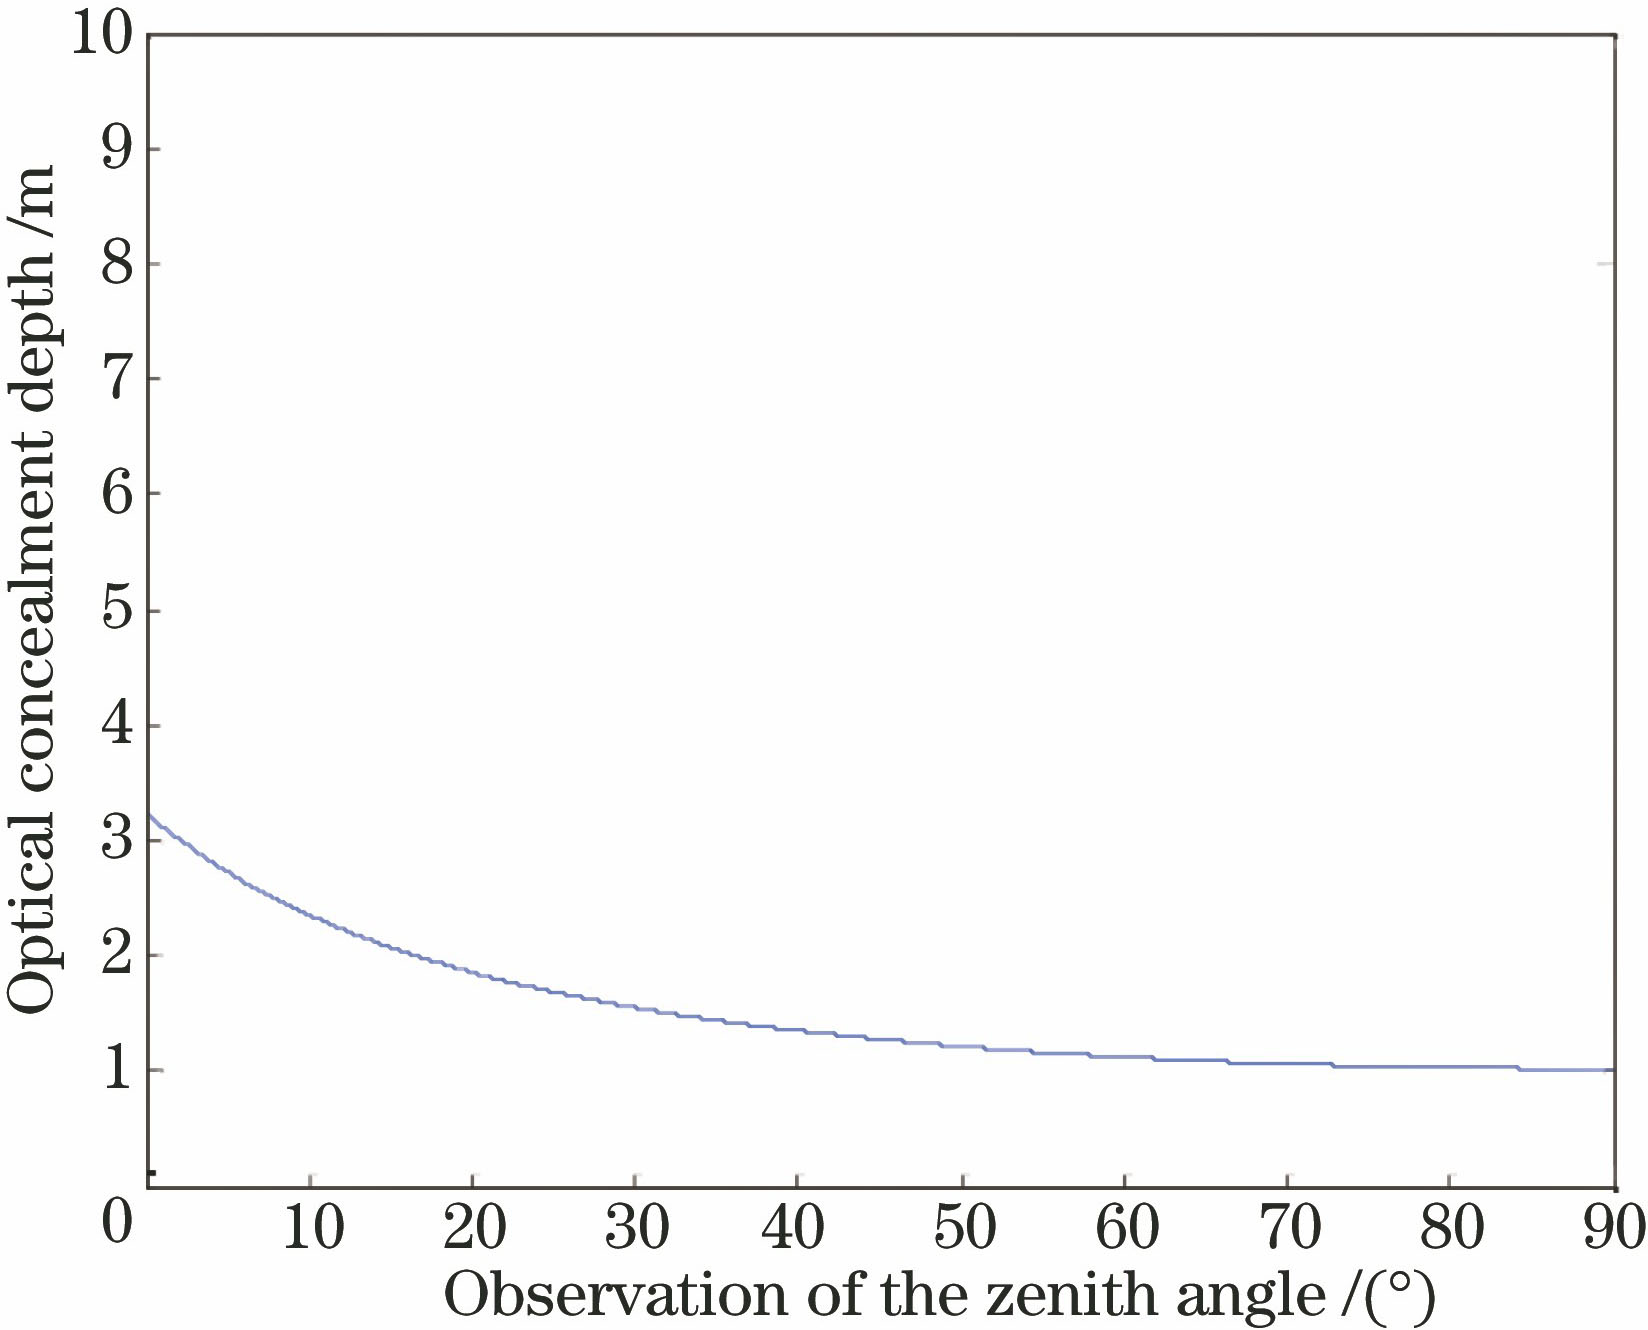 Relationship between the optical concealment depth and the observation of the zenith angle